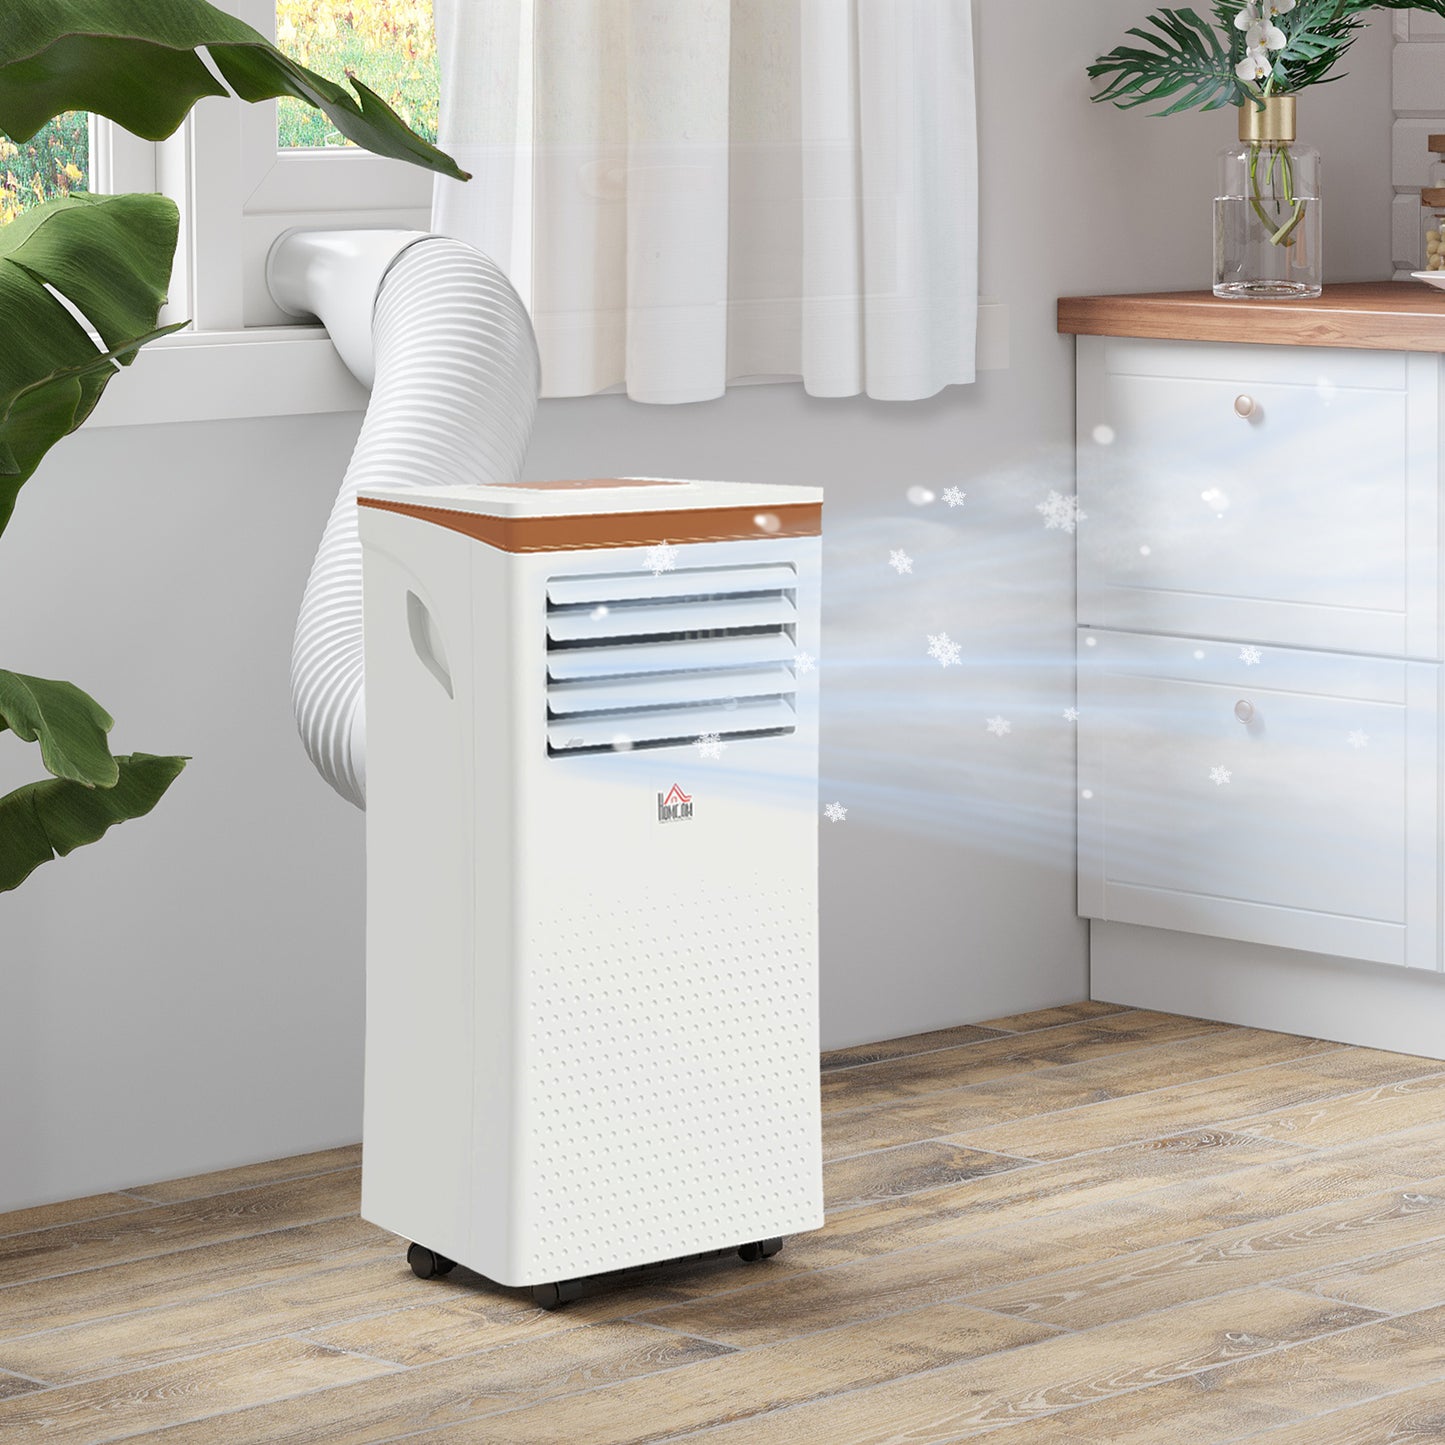 HOMCOM 9000 BTU 4In1 Compact Portable Mobile Air Conditioner Unit Cooling Dehumidifying Ventilating w/ Fan Remote LED 24 Hr Timer Auto Shut-Down